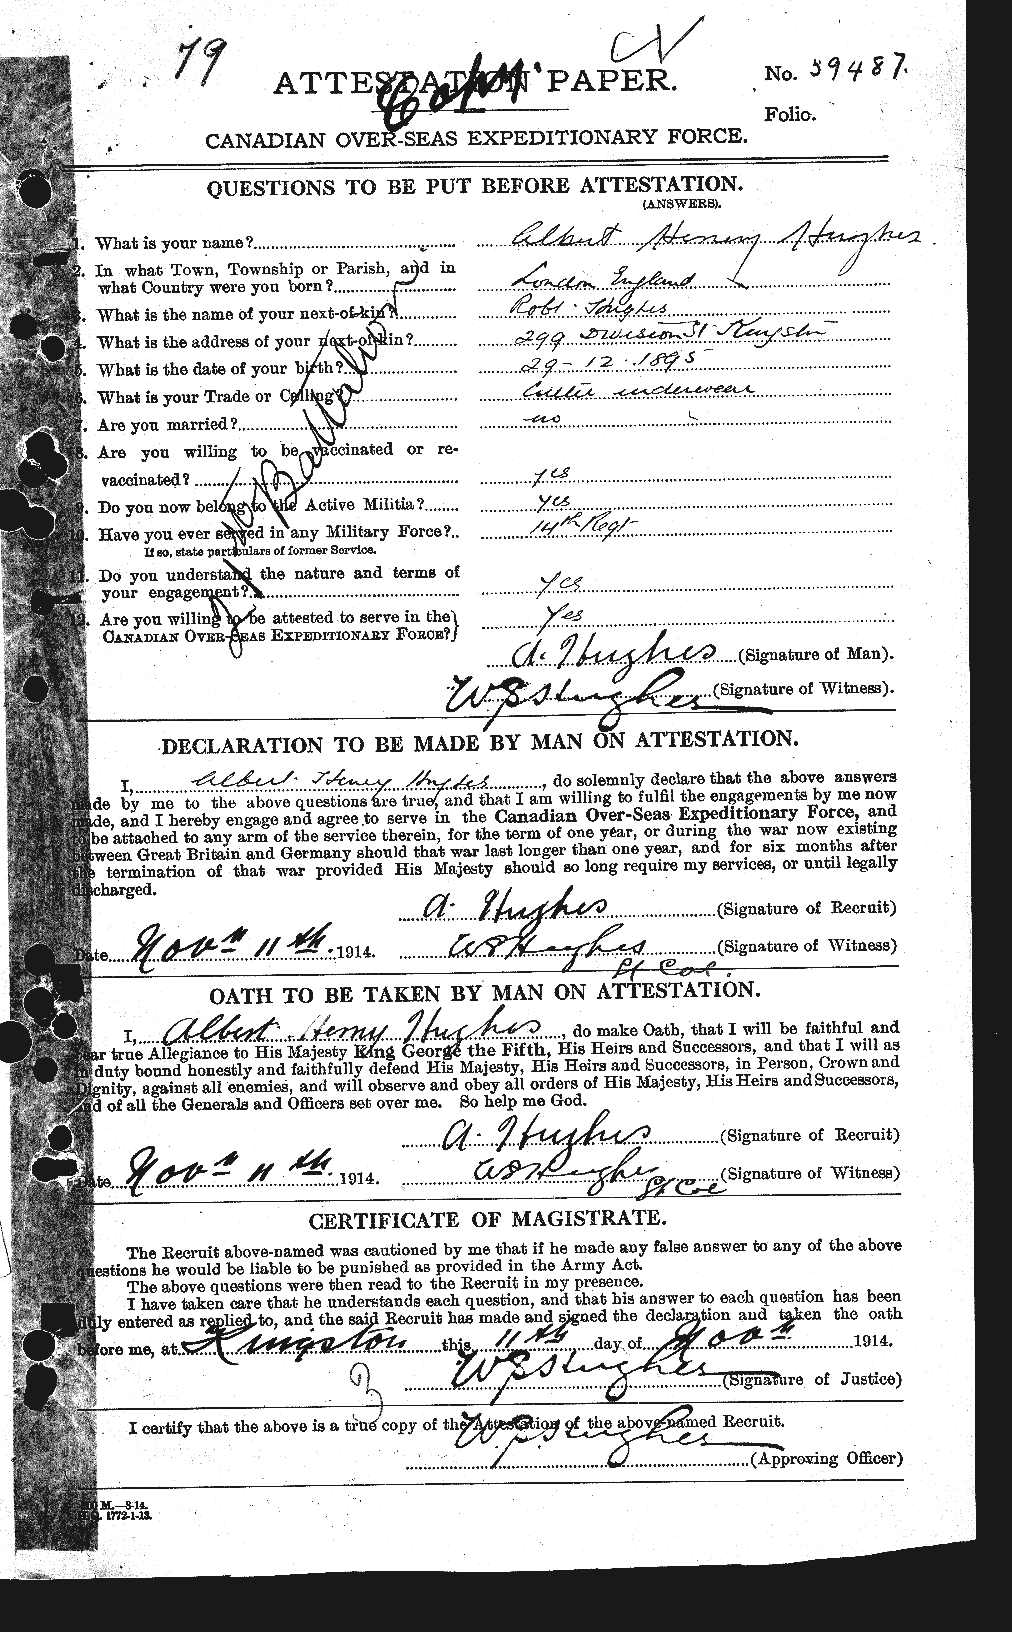 Personnel Records of the First World War - CEF 402526a